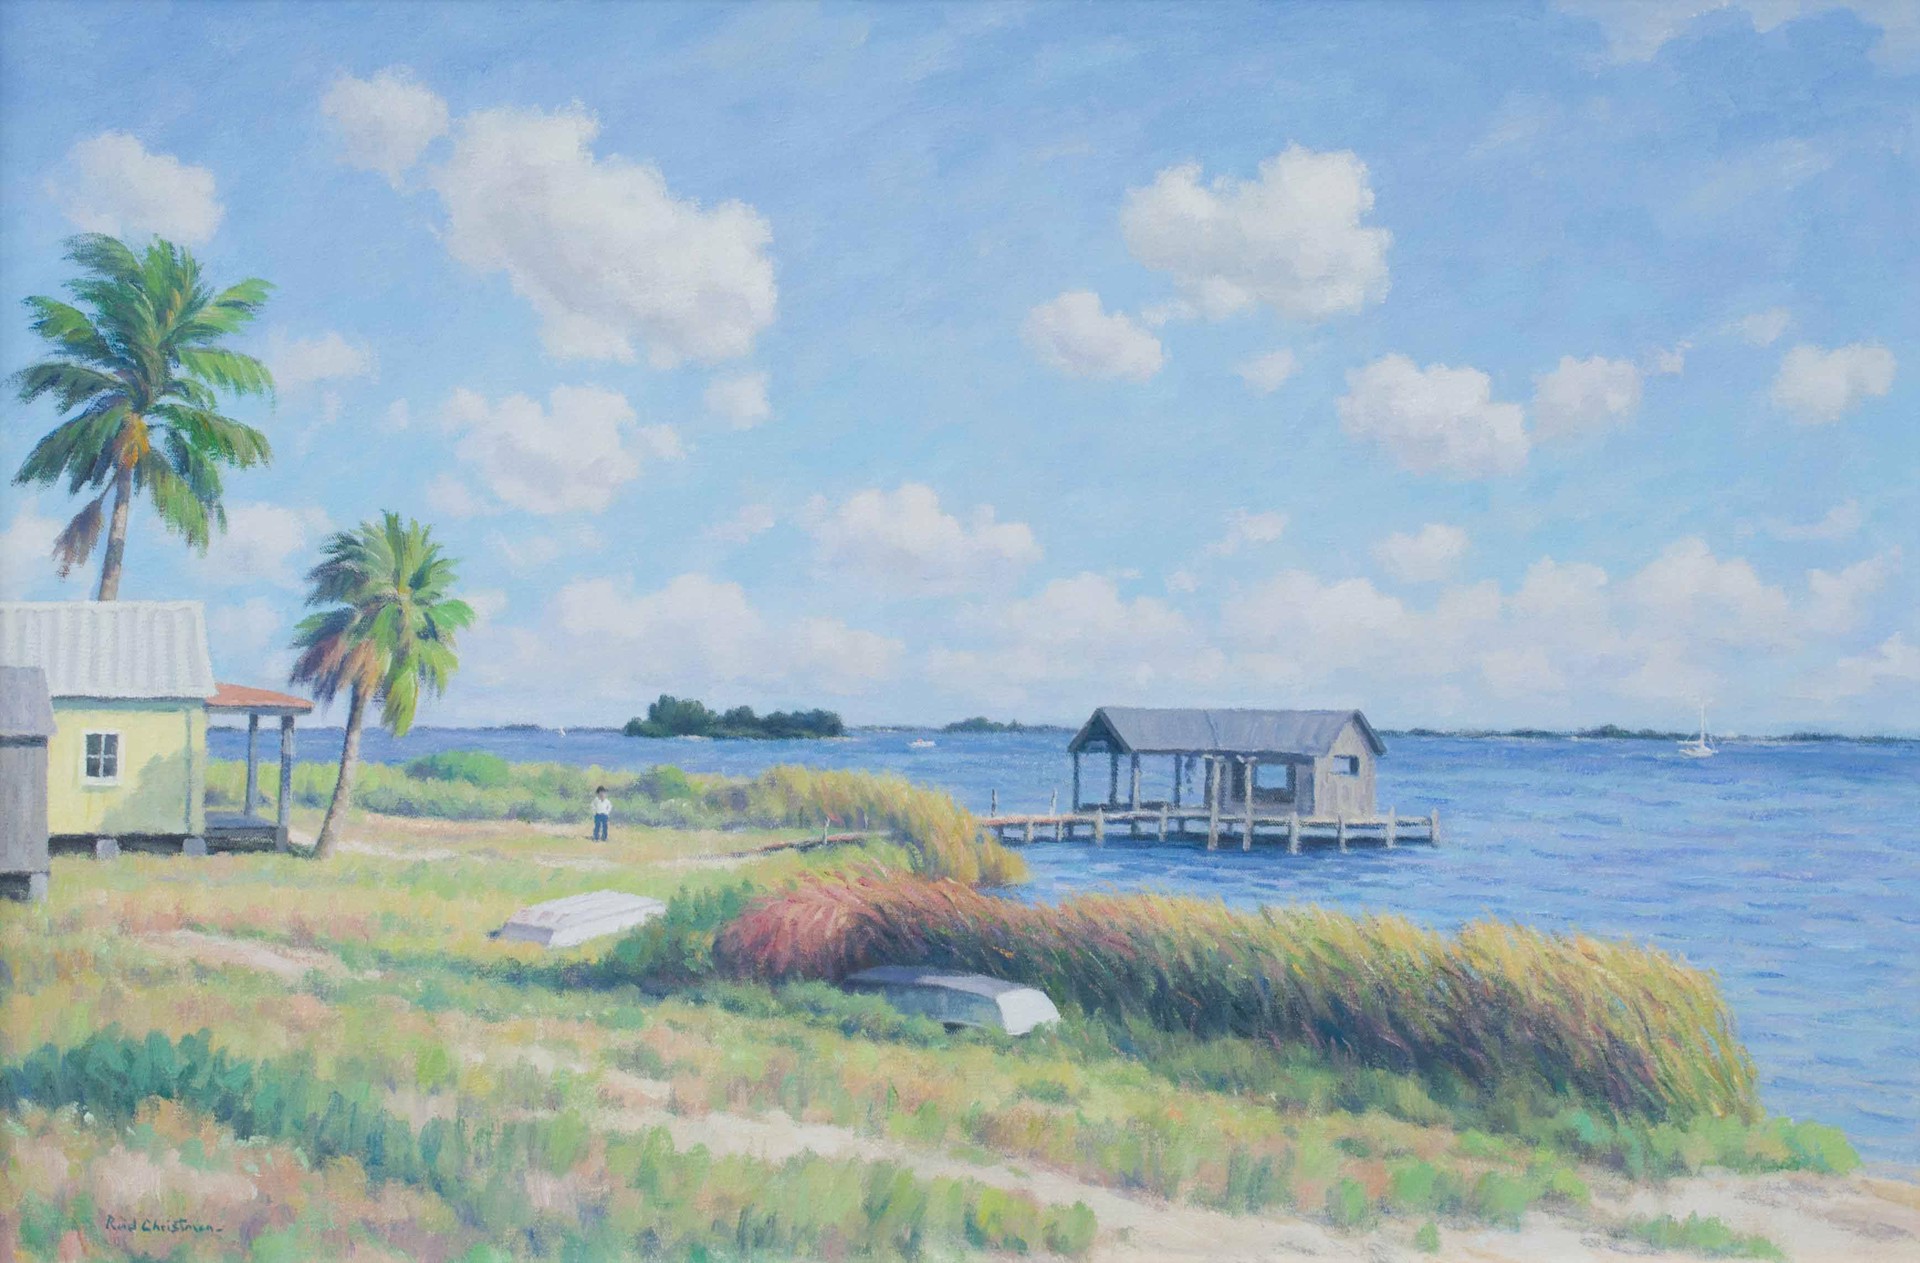 Yellow House by the River by Reid Christman